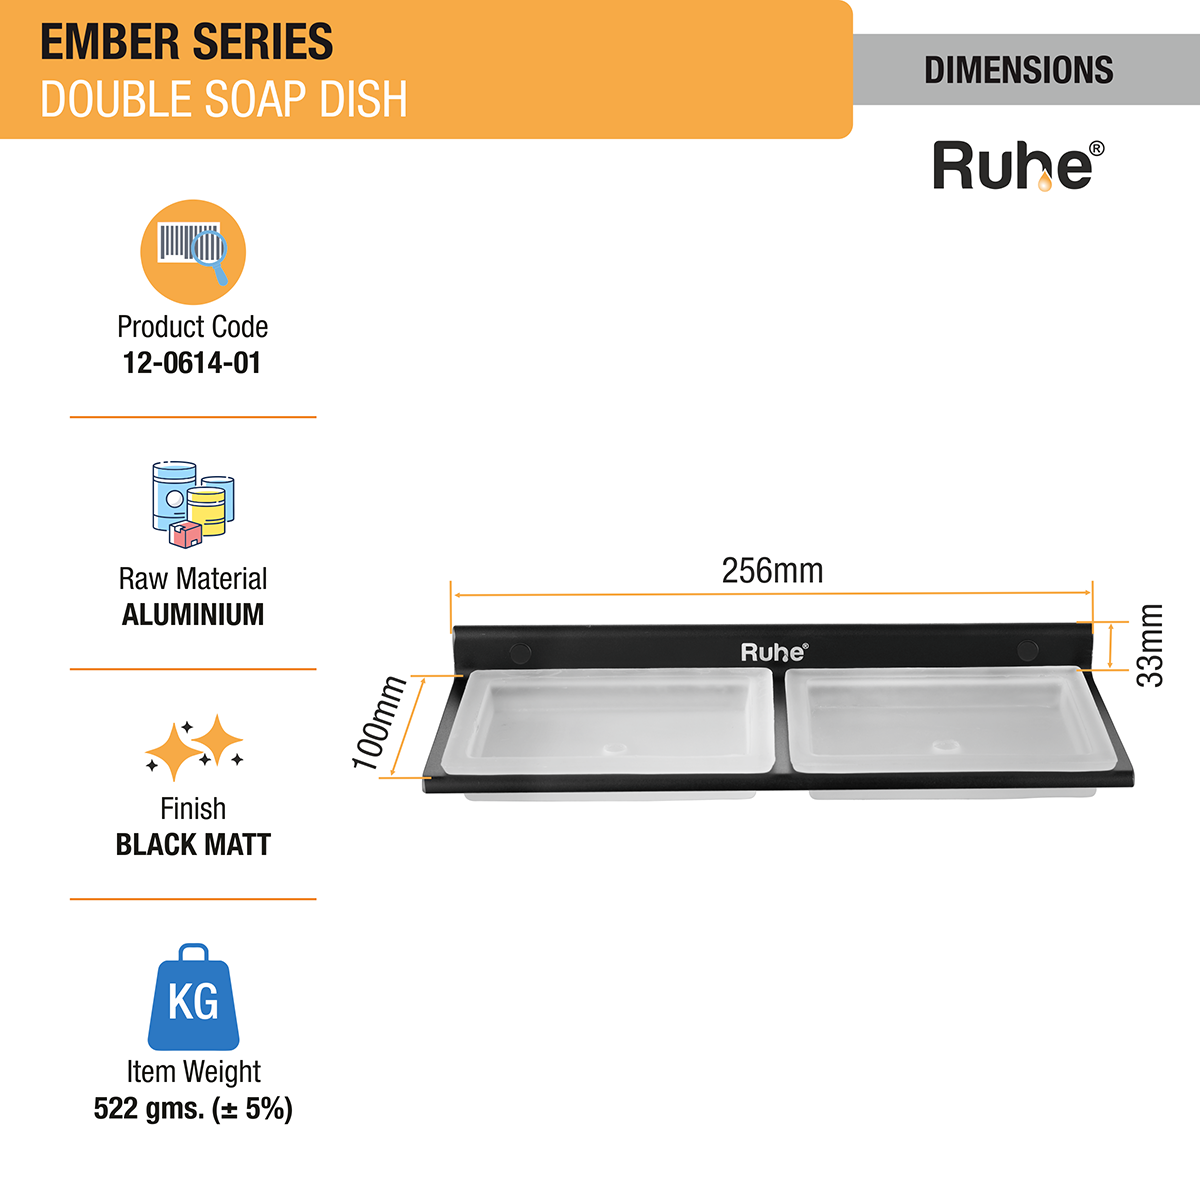 Ember Double Soap Dish (Space Aluminium) dimensions and sizes